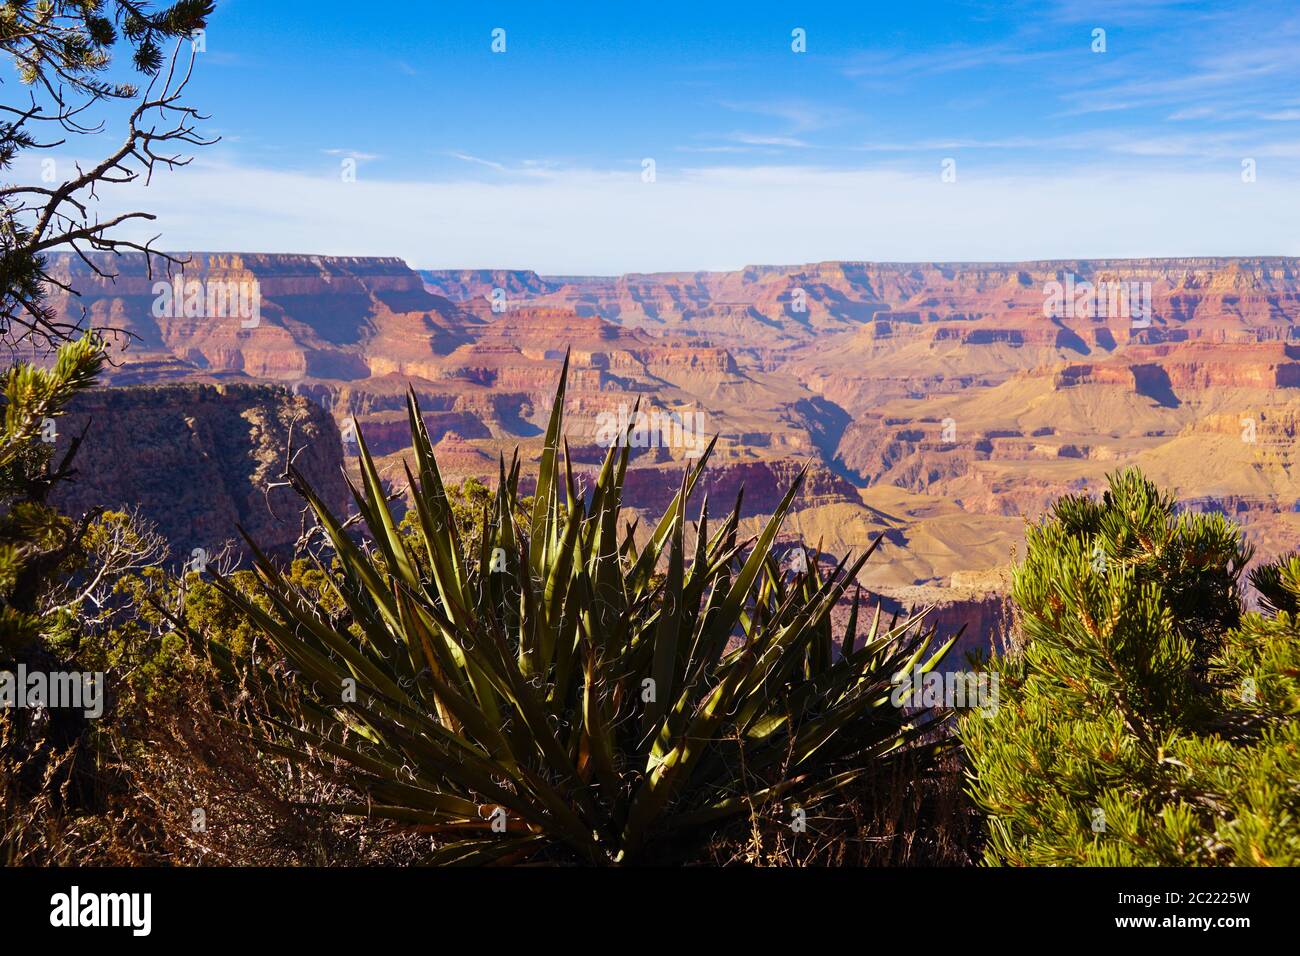 A large yucca plant sits on the edge of the Grand Canyon in Northern Arizona. Stock Photo